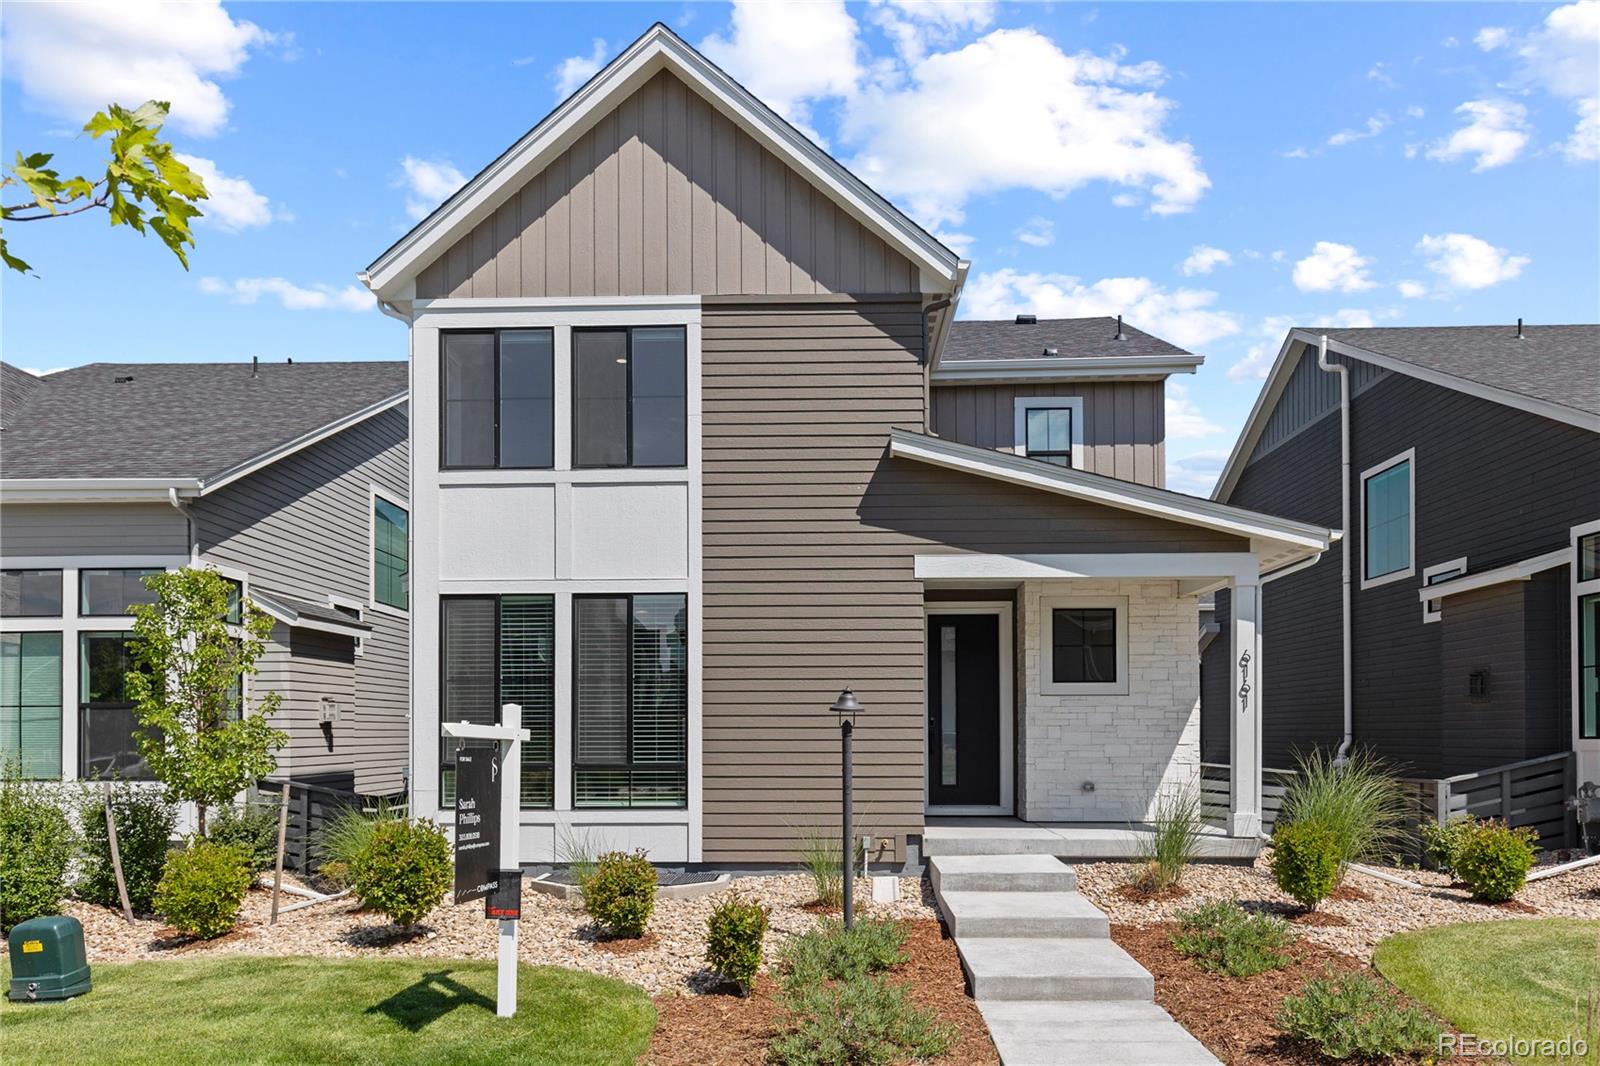 6161  Stable View Street, castle pines MLS: 5470346 Beds: 4 Baths: 4 Price: $739,000